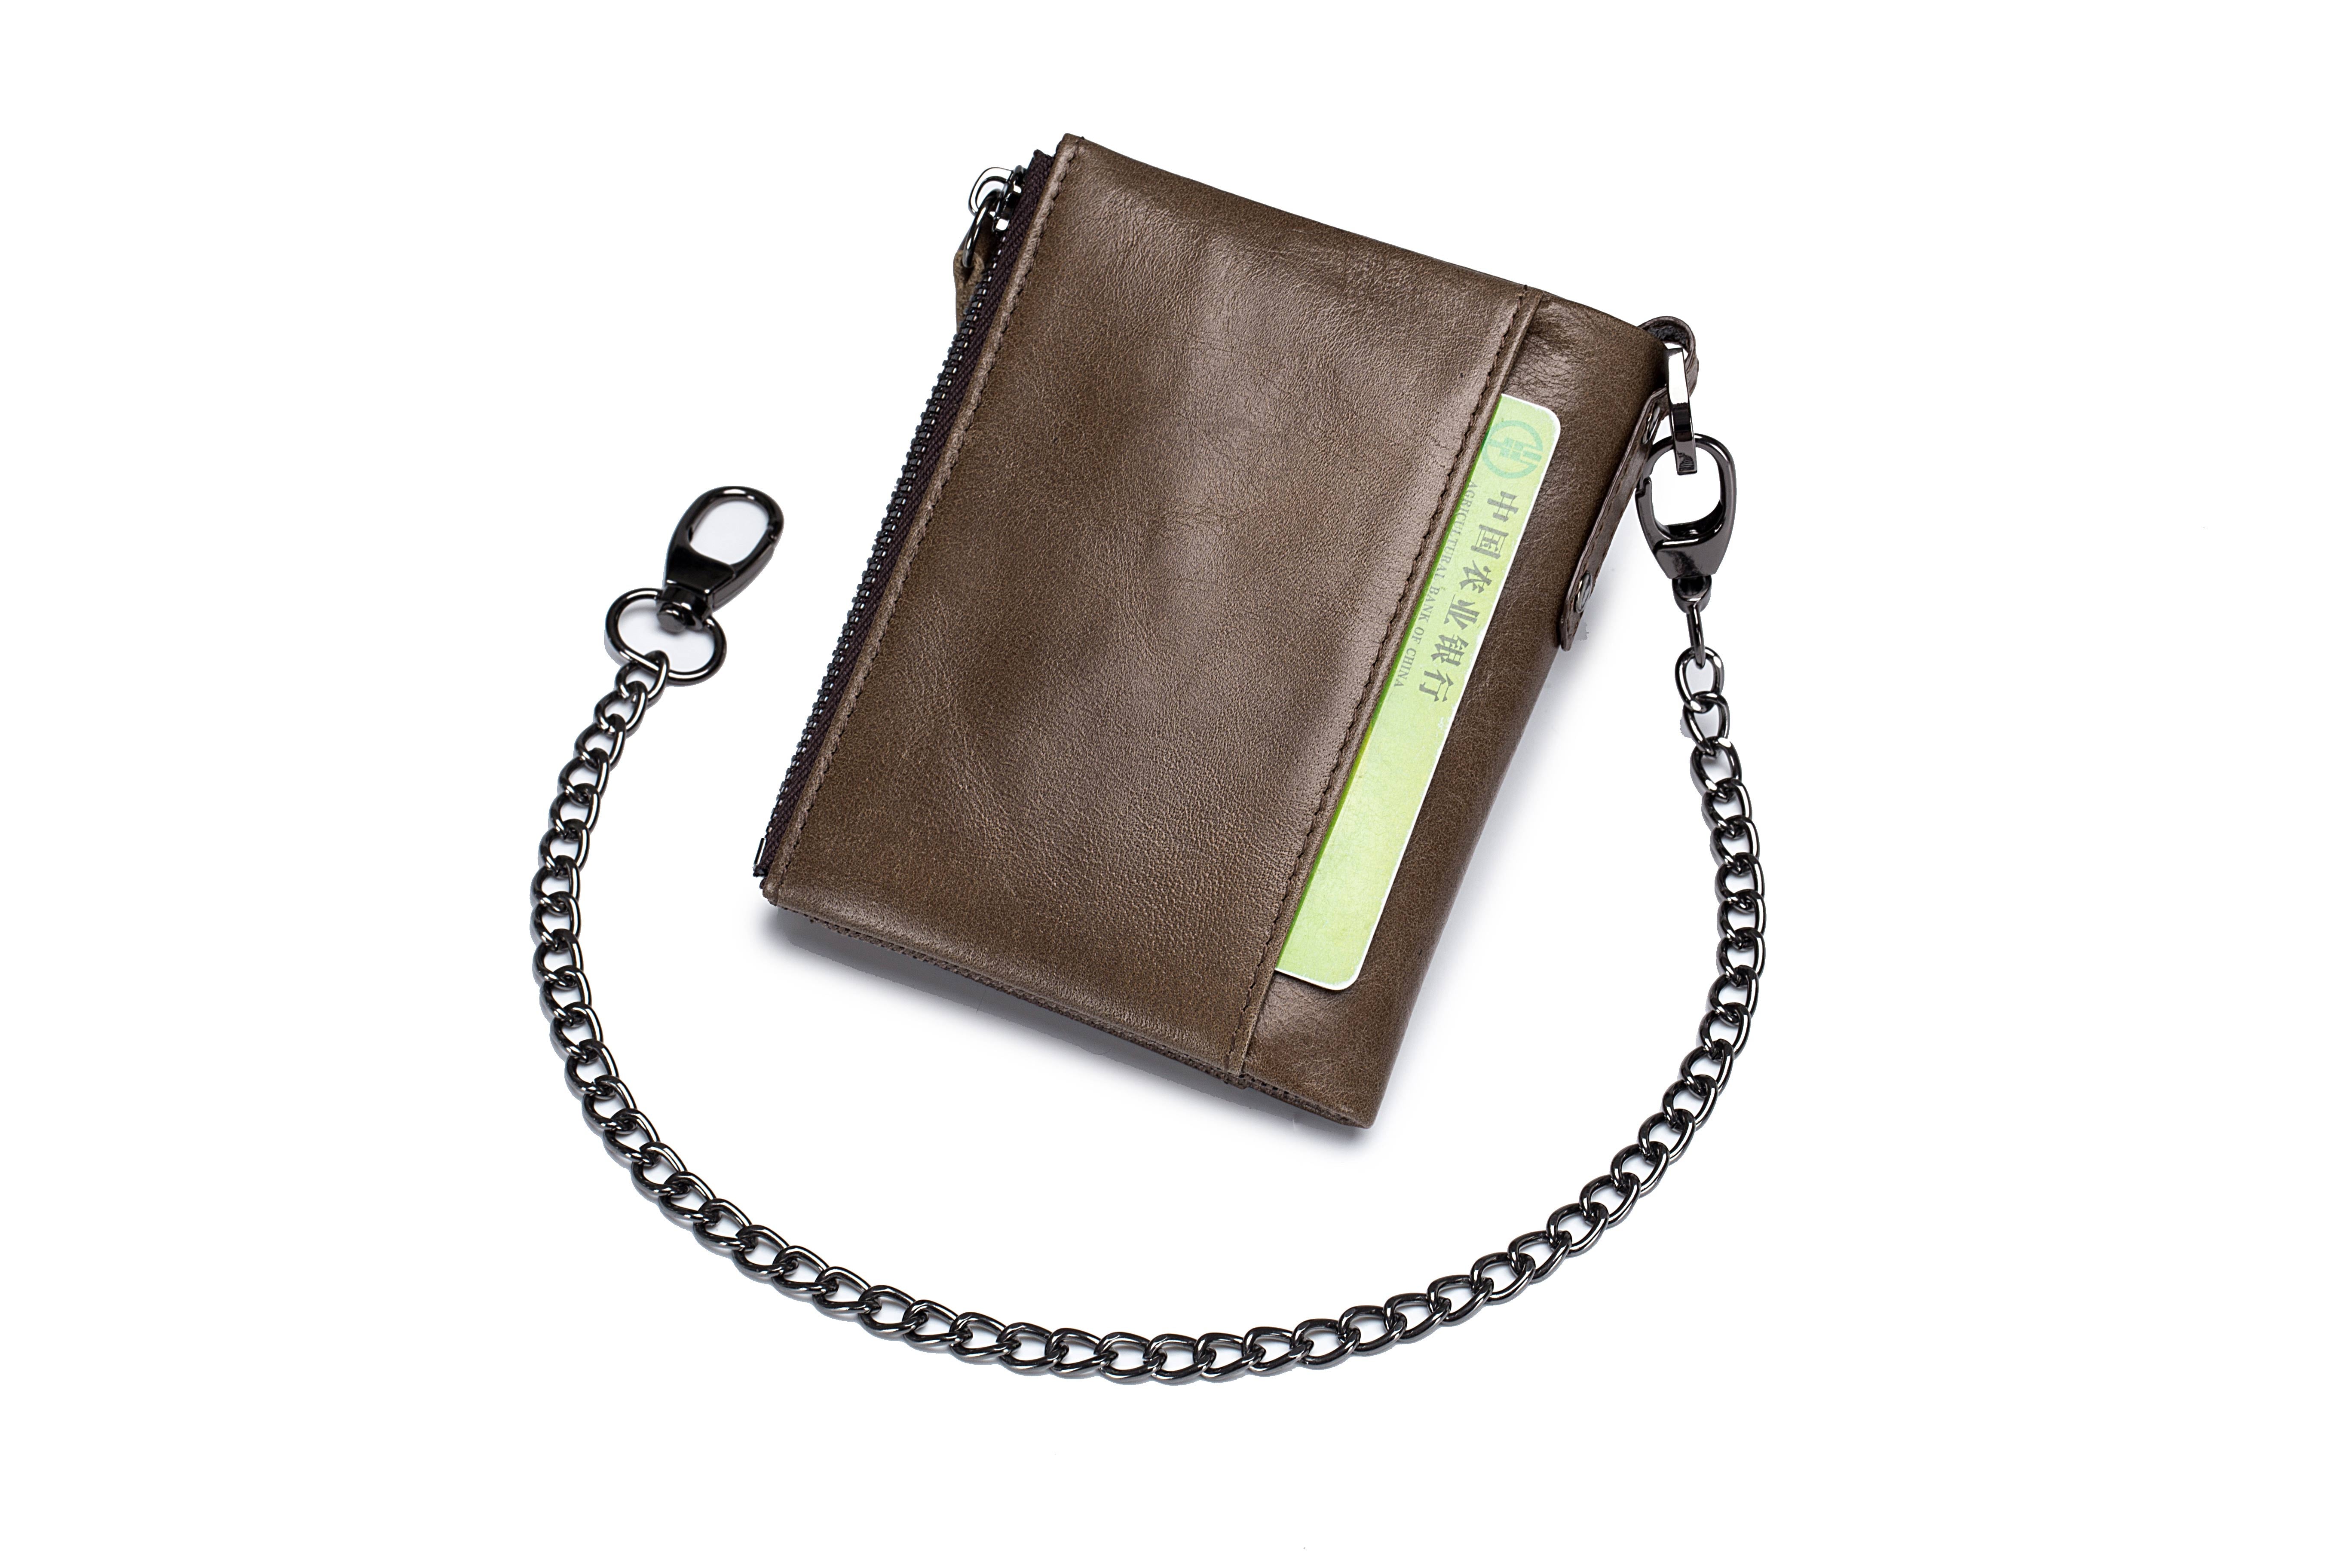 Bullcaptain Leather Zipper Wallet with Chain Rfid Blocking Badge Holder Multifunction Coin Pocket - 0201